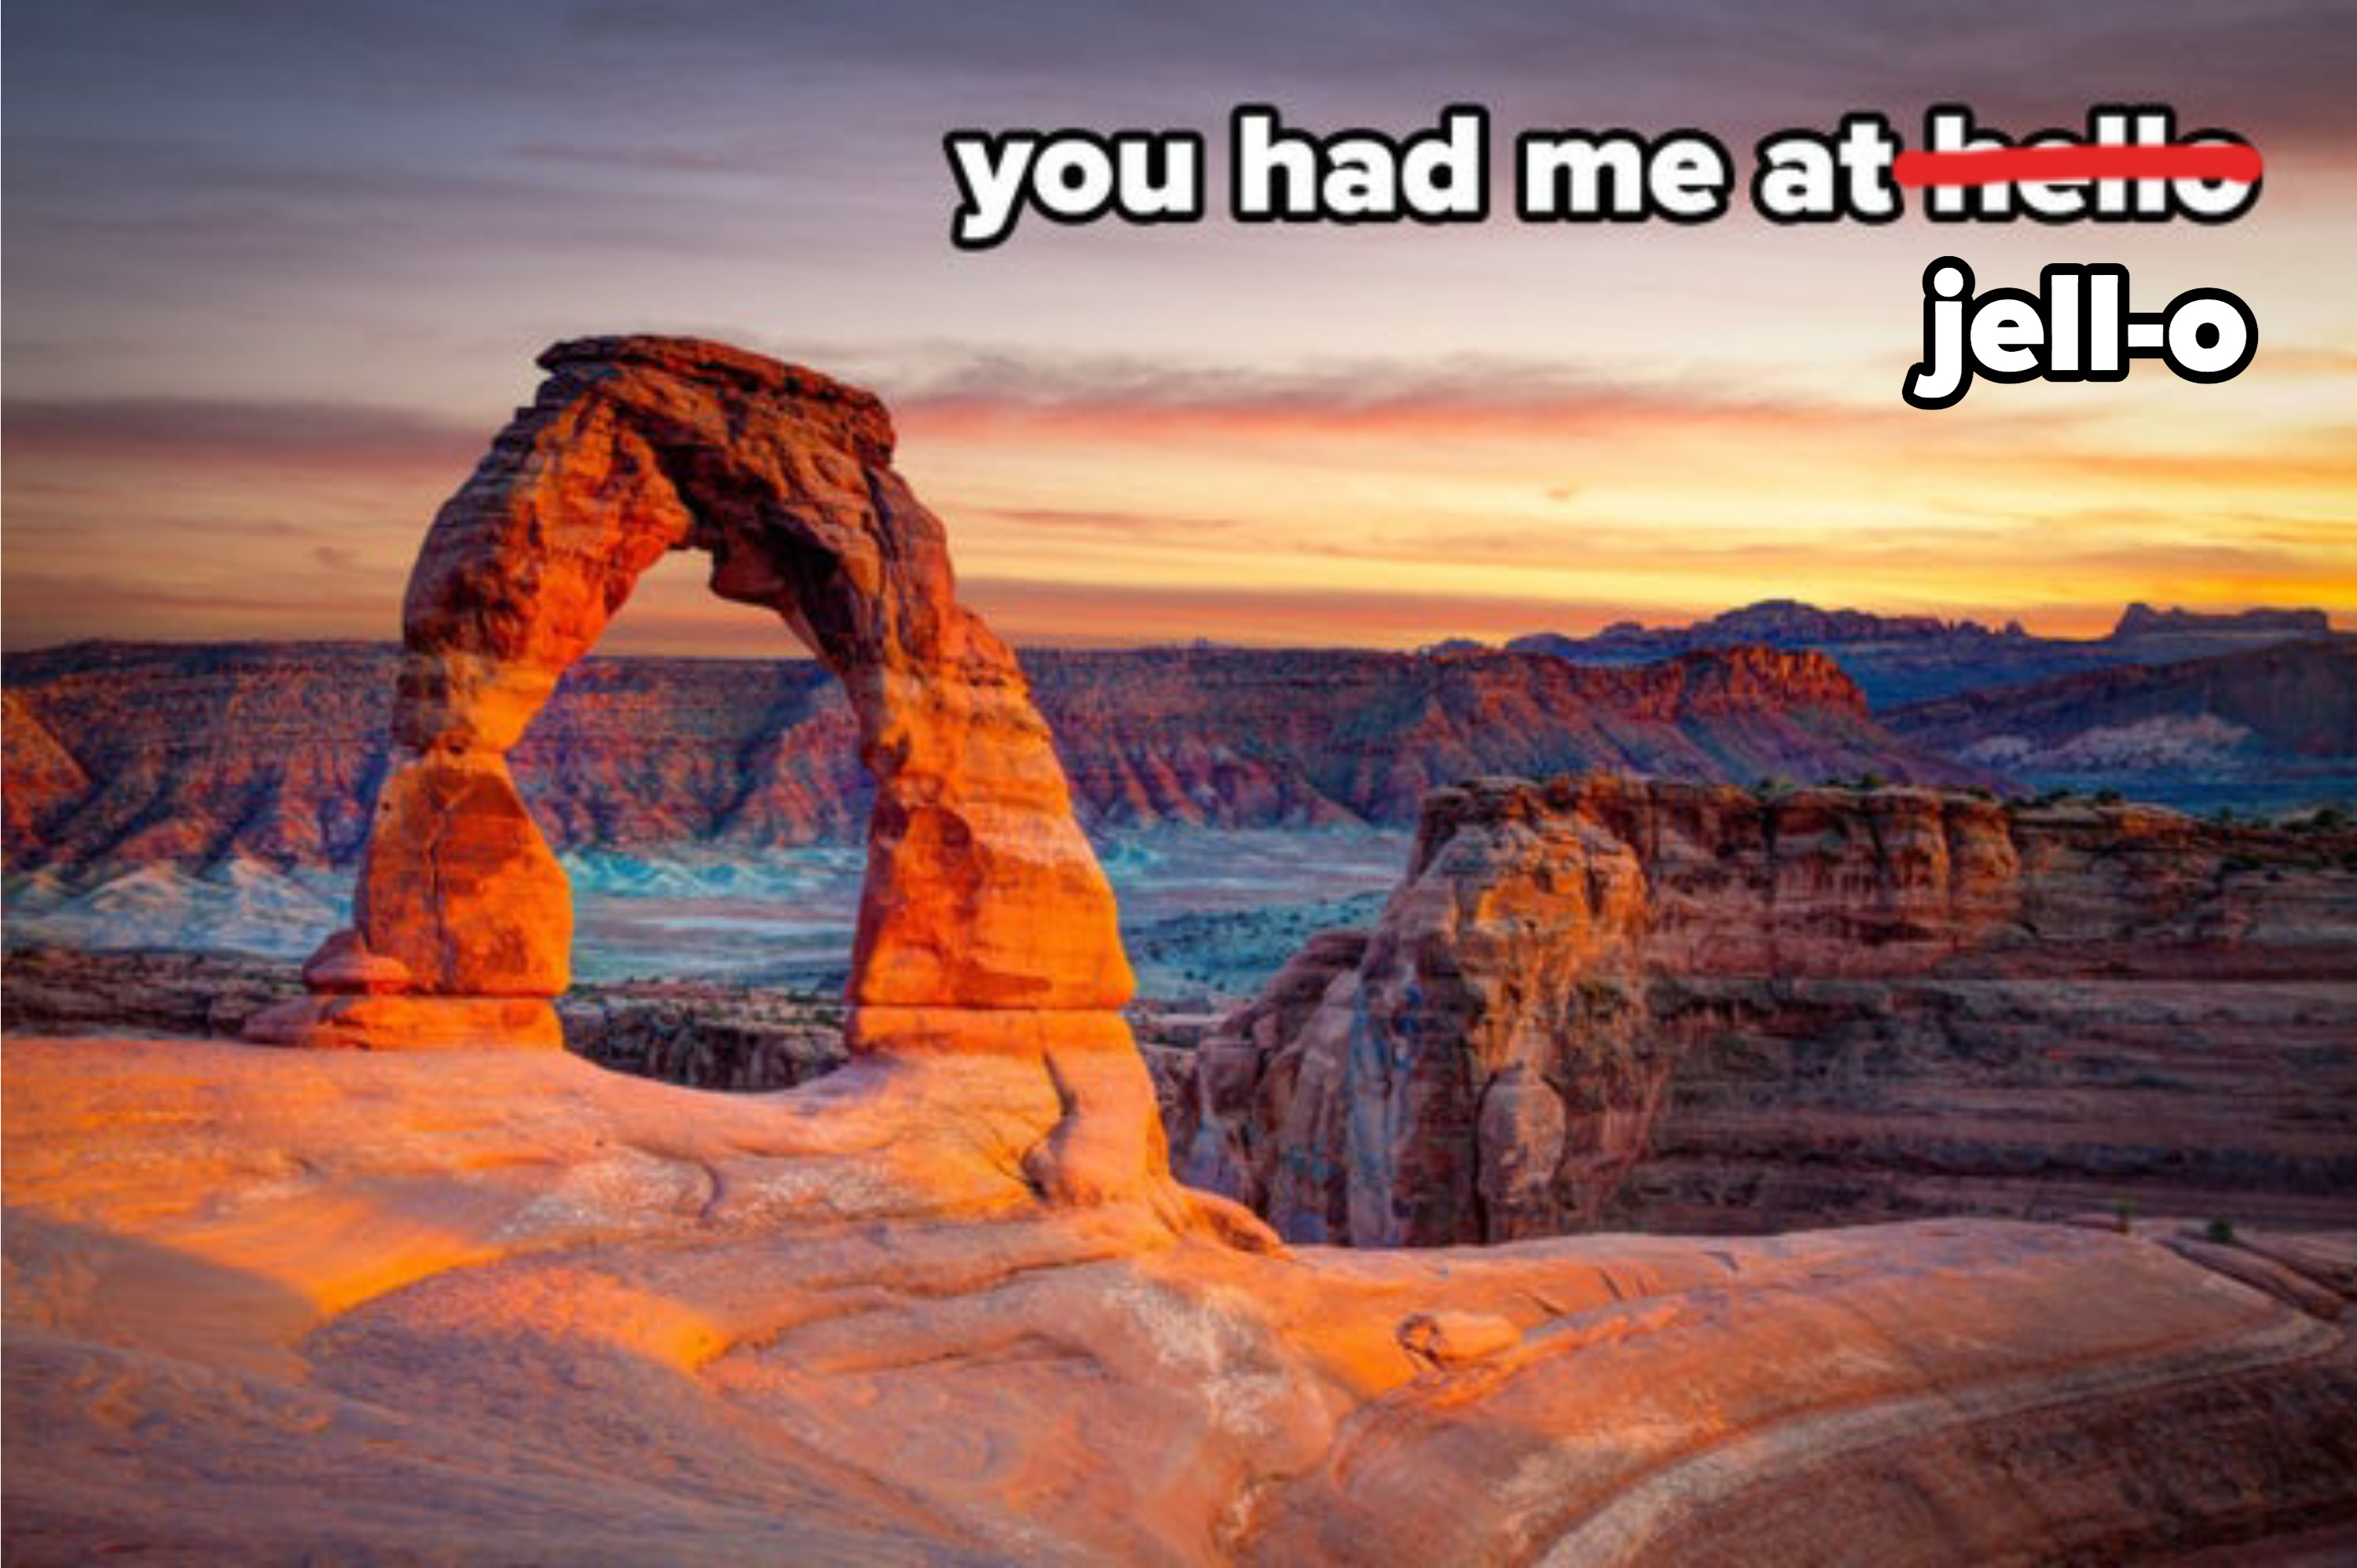 a red rock formation in a Utah national park, with caption: you had me at hello (hello crossed out and replaced with jell-o)